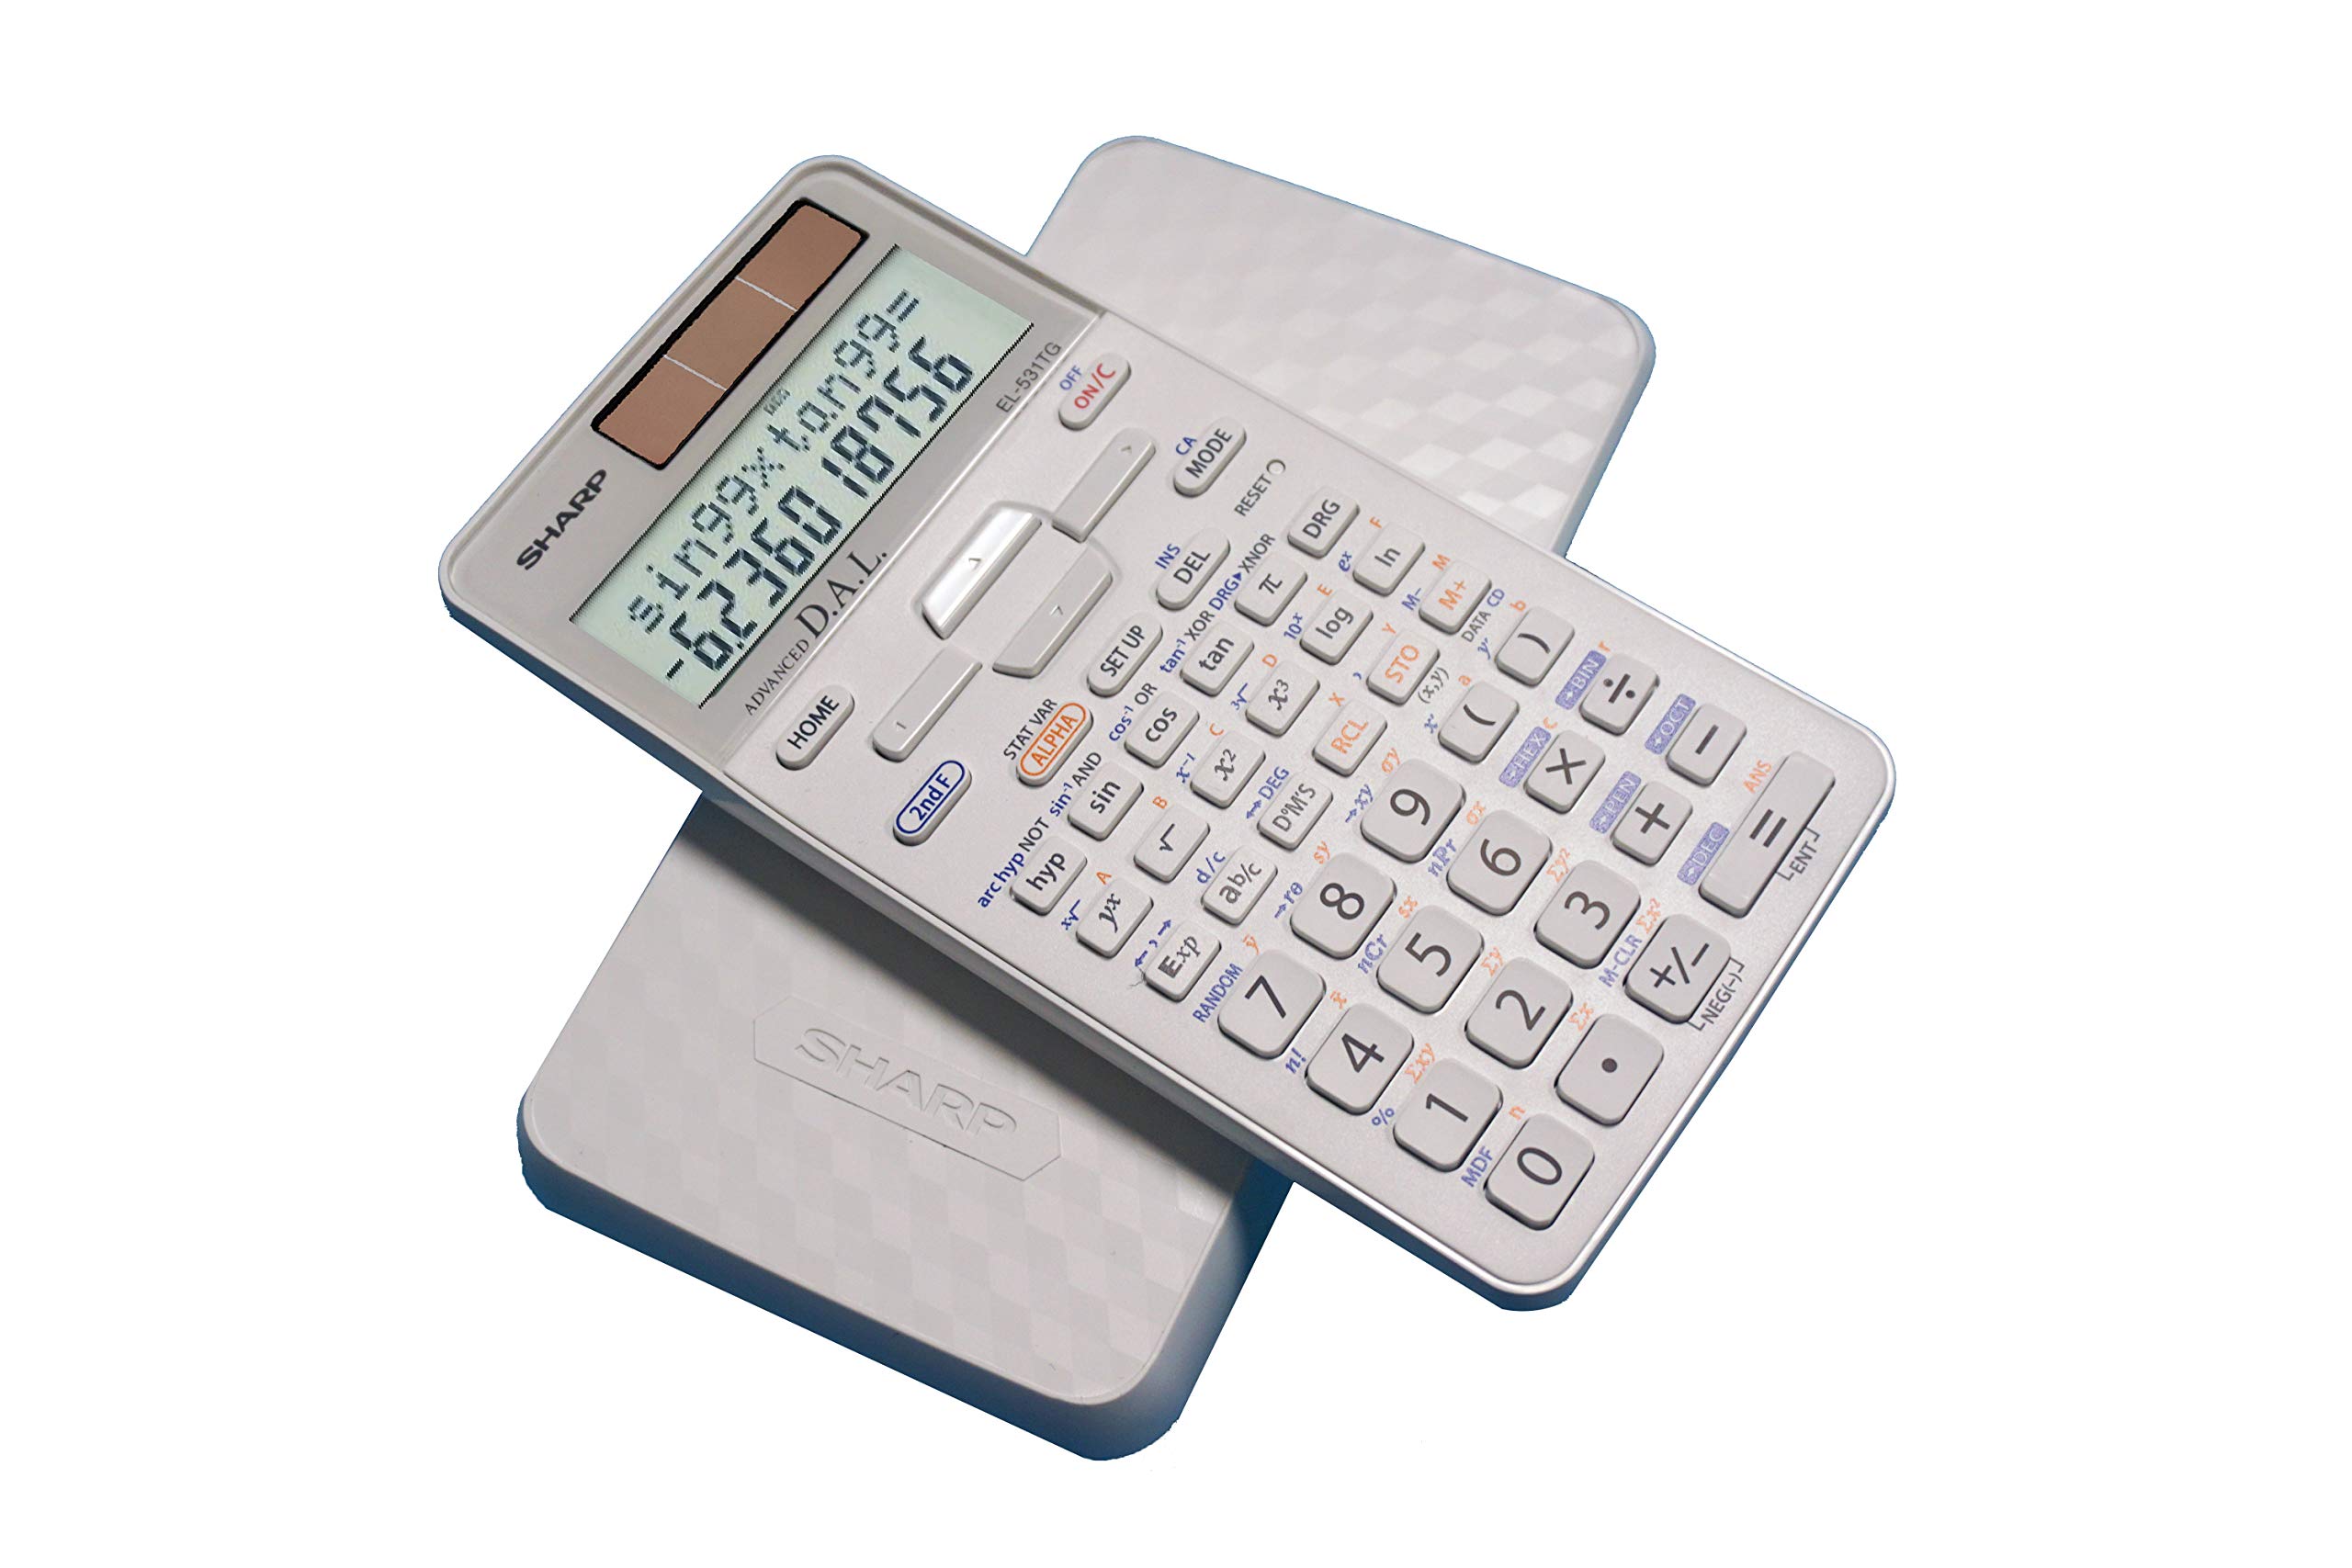 Sharp EL-531TGBDW 12-Digit Scientific/Engineering Calculator with Protective Hard Cover, Battery and Solar Hybrid Powered LCD Display, Great for Students and Professionals, Silver